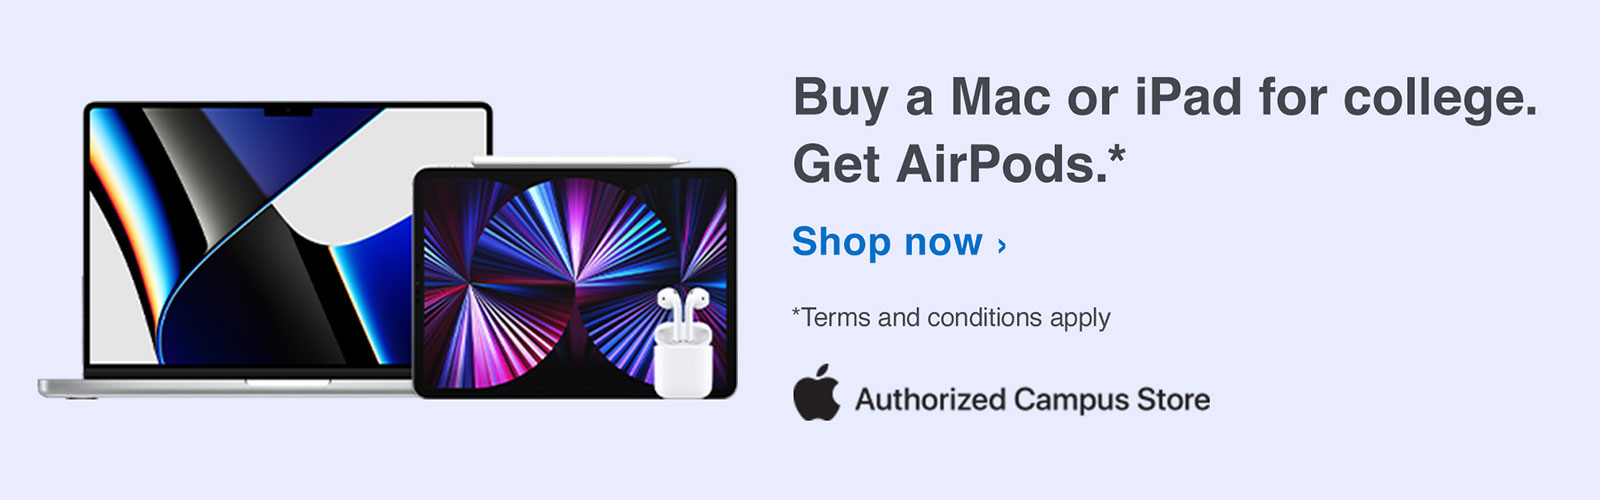 Apple - Get Airpods